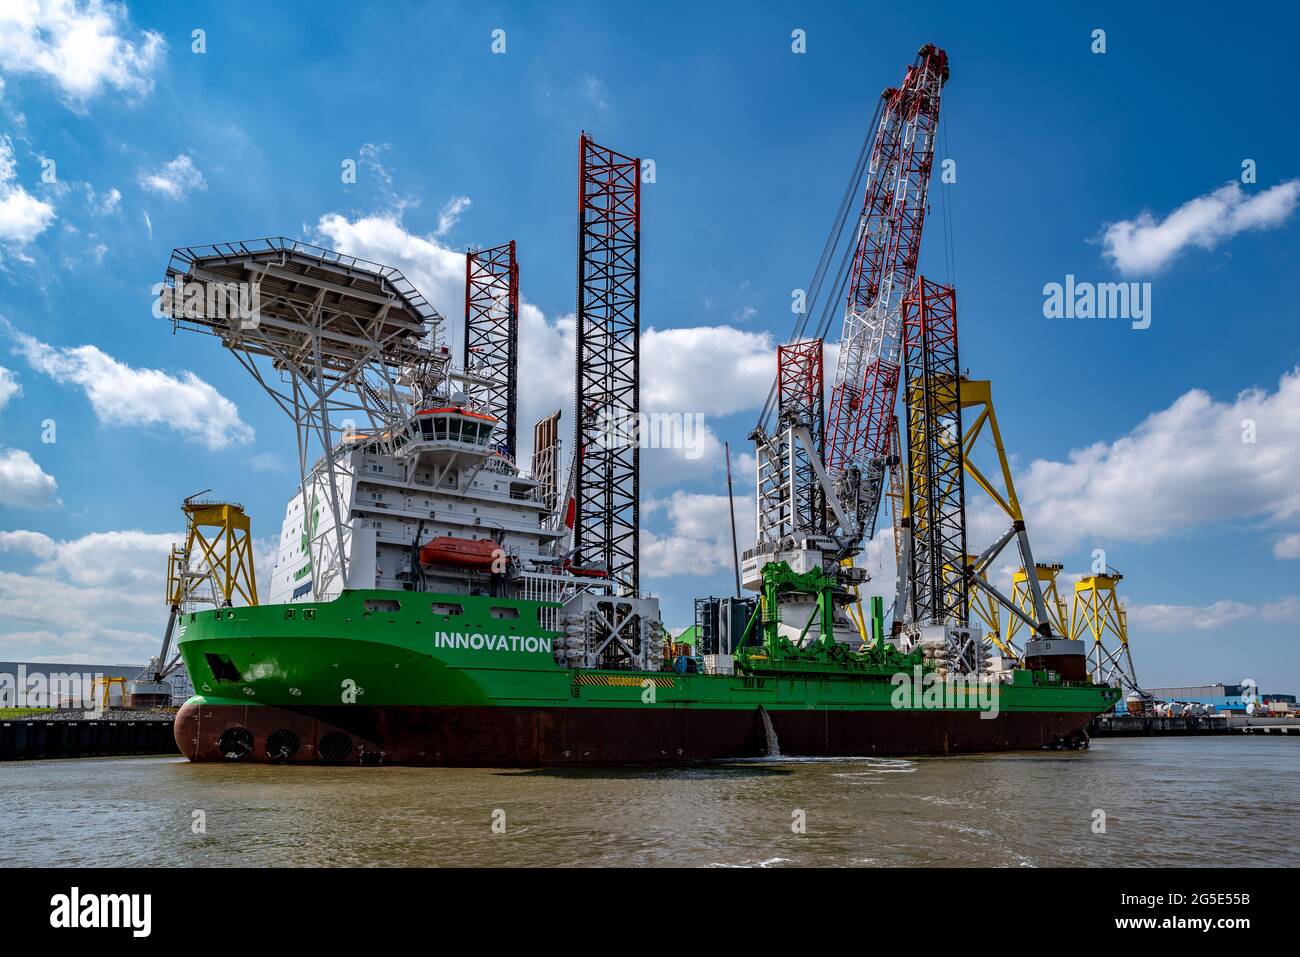 Offshore support vessel Innovation Stock Photo